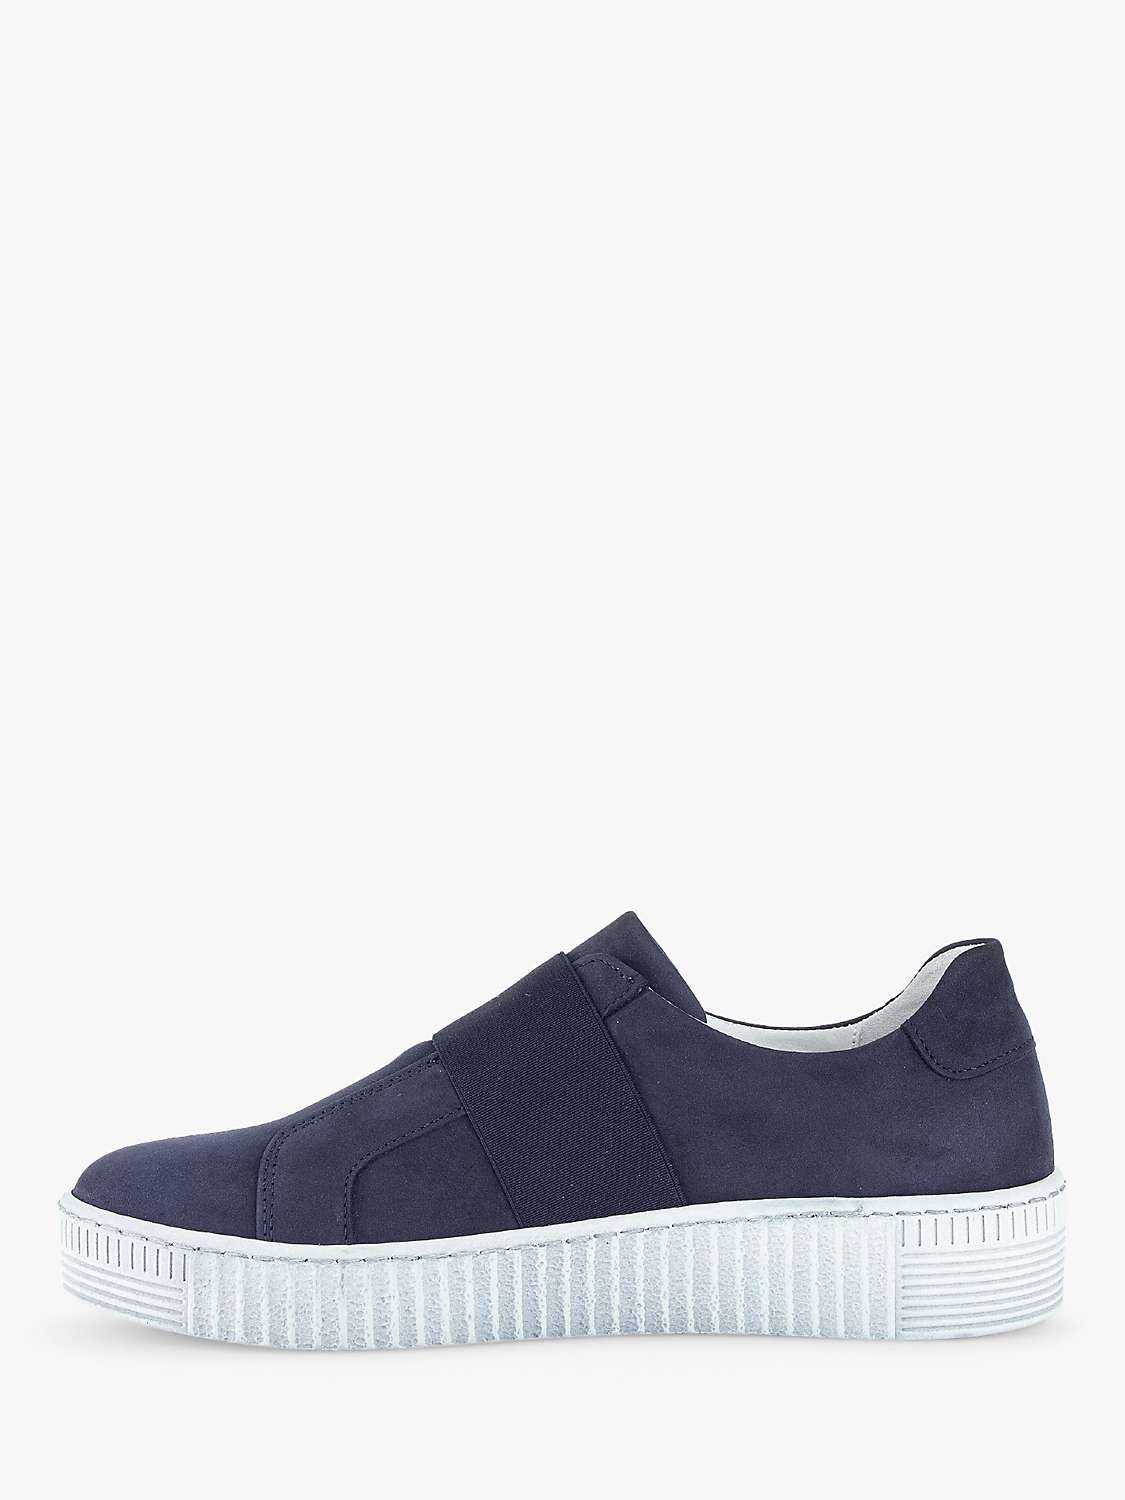 Buy Gabor Willow Fashion Trainers, Blue Online at johnlewis.com